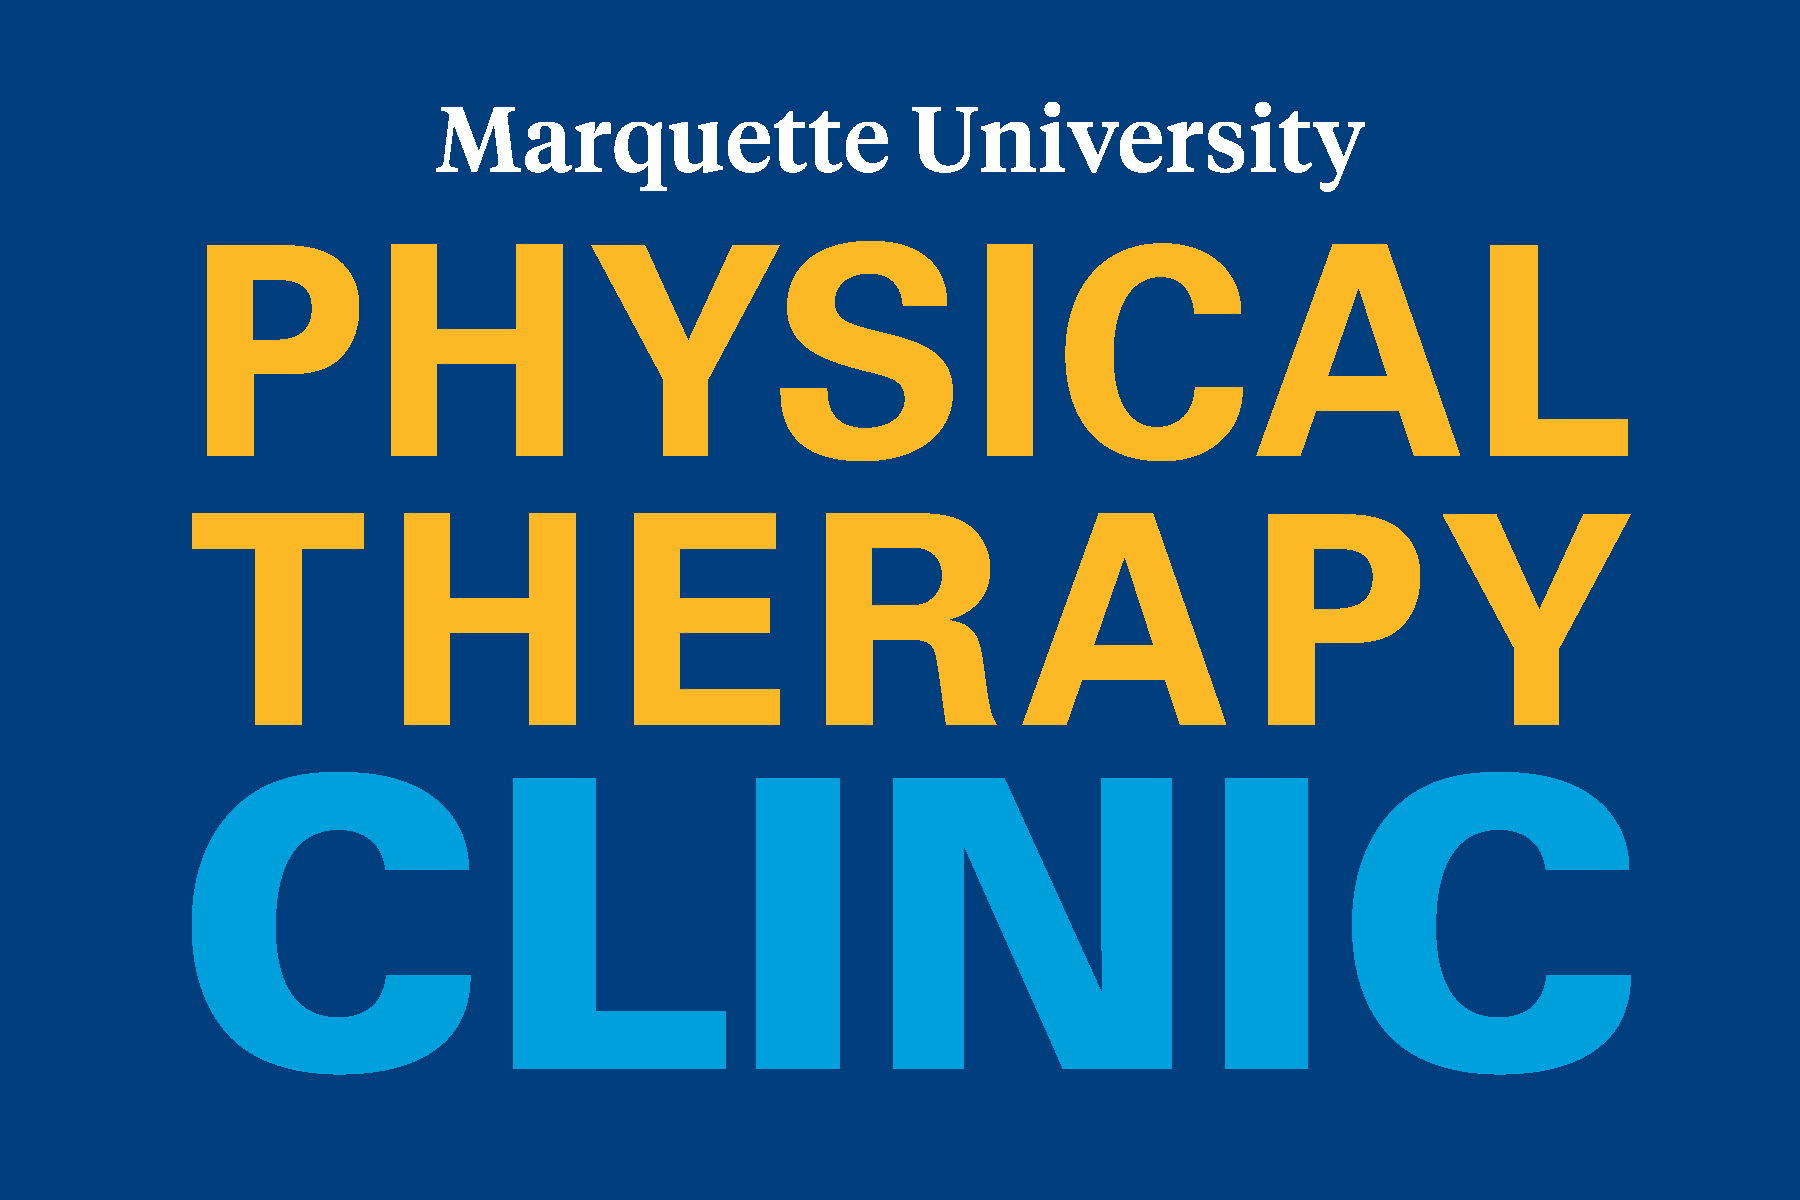 MU Physical Therapy Graphic